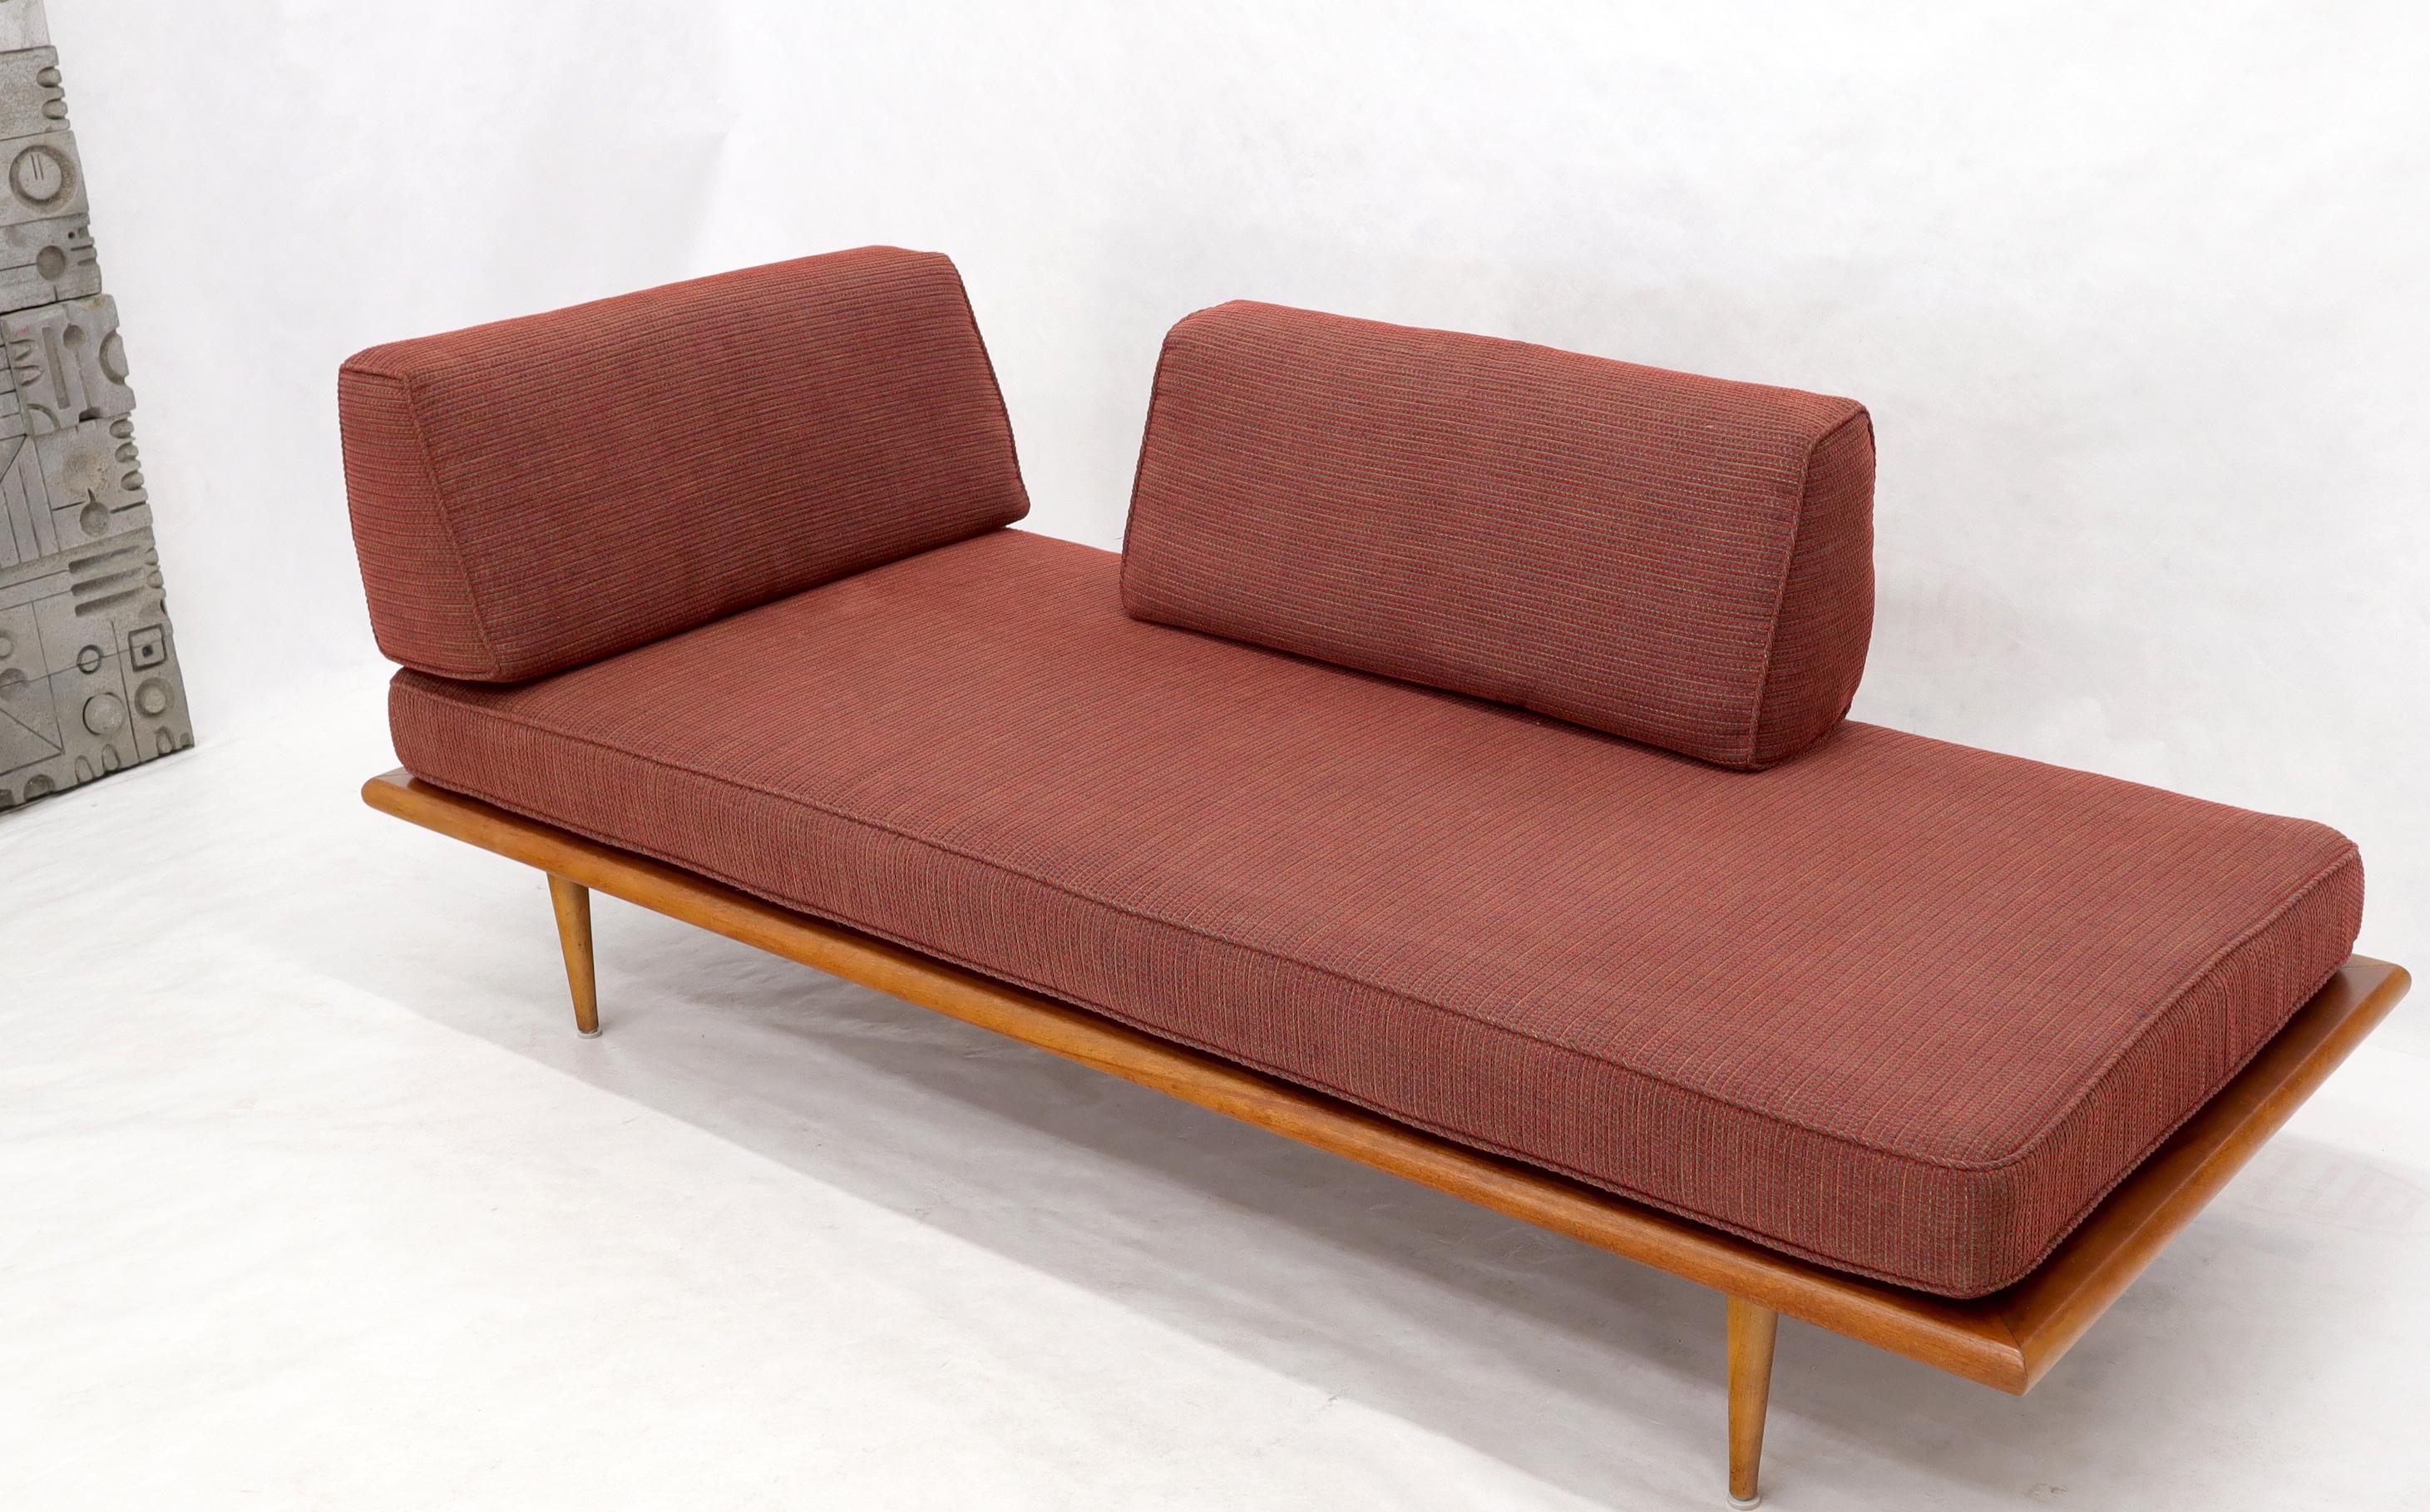 Vintage George Nelson für Herman Miller Daybed Cot Sofa Chaise Lounge 2